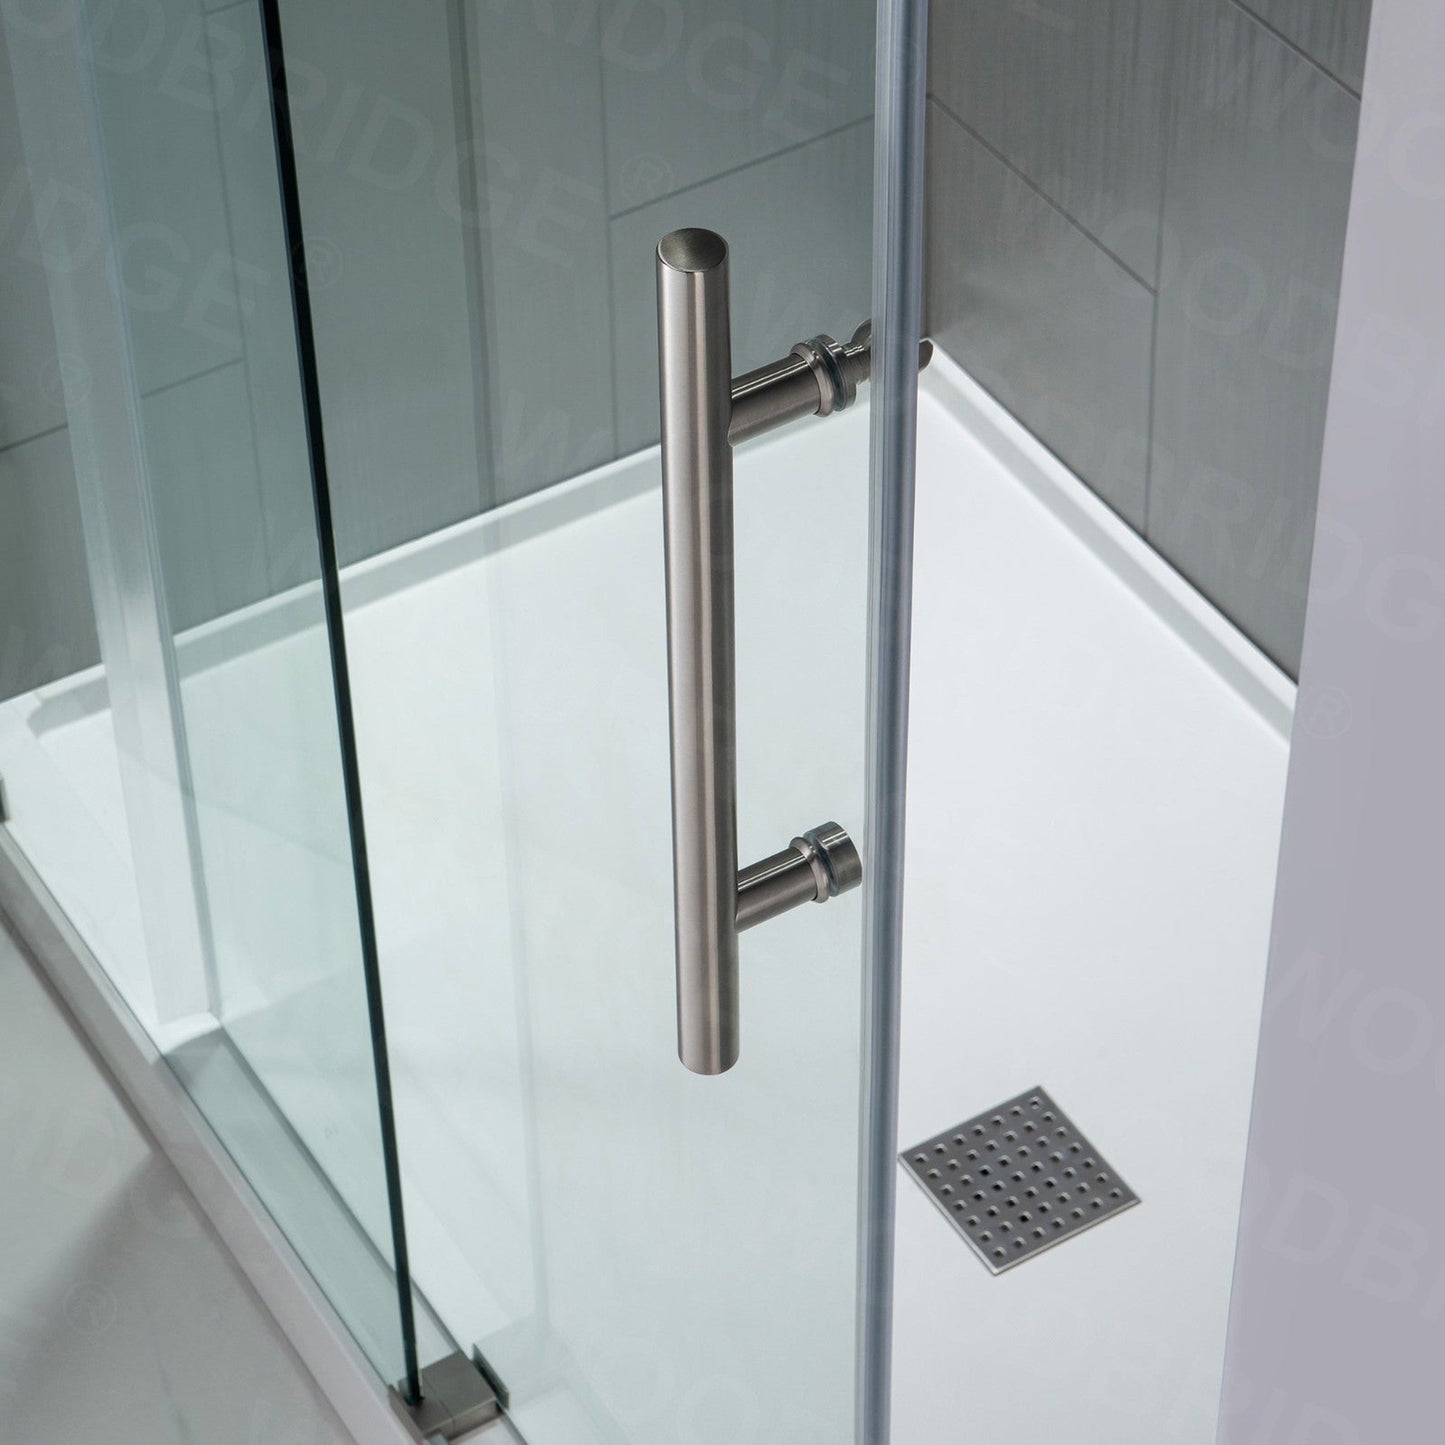 WoodBridge 72" W x 76" H Clear Tempered Glass Frameless Shower Door With Brushed Nickel Hardware Finish